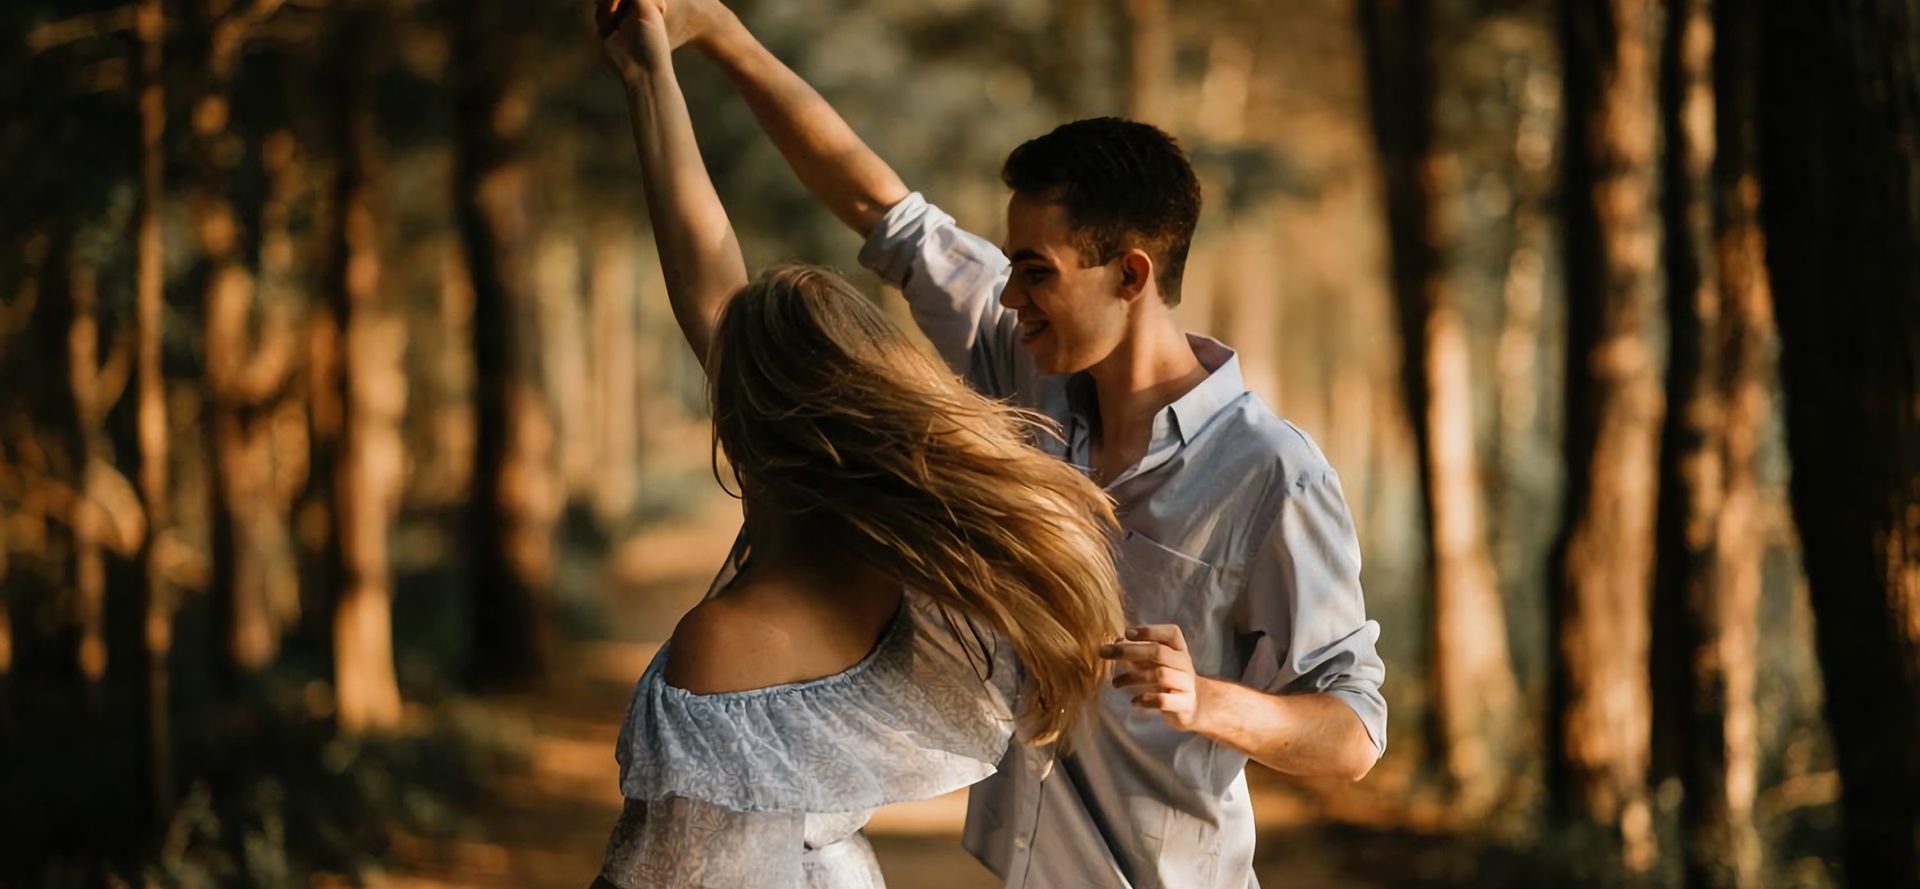 A couple in love dancing in the woods.